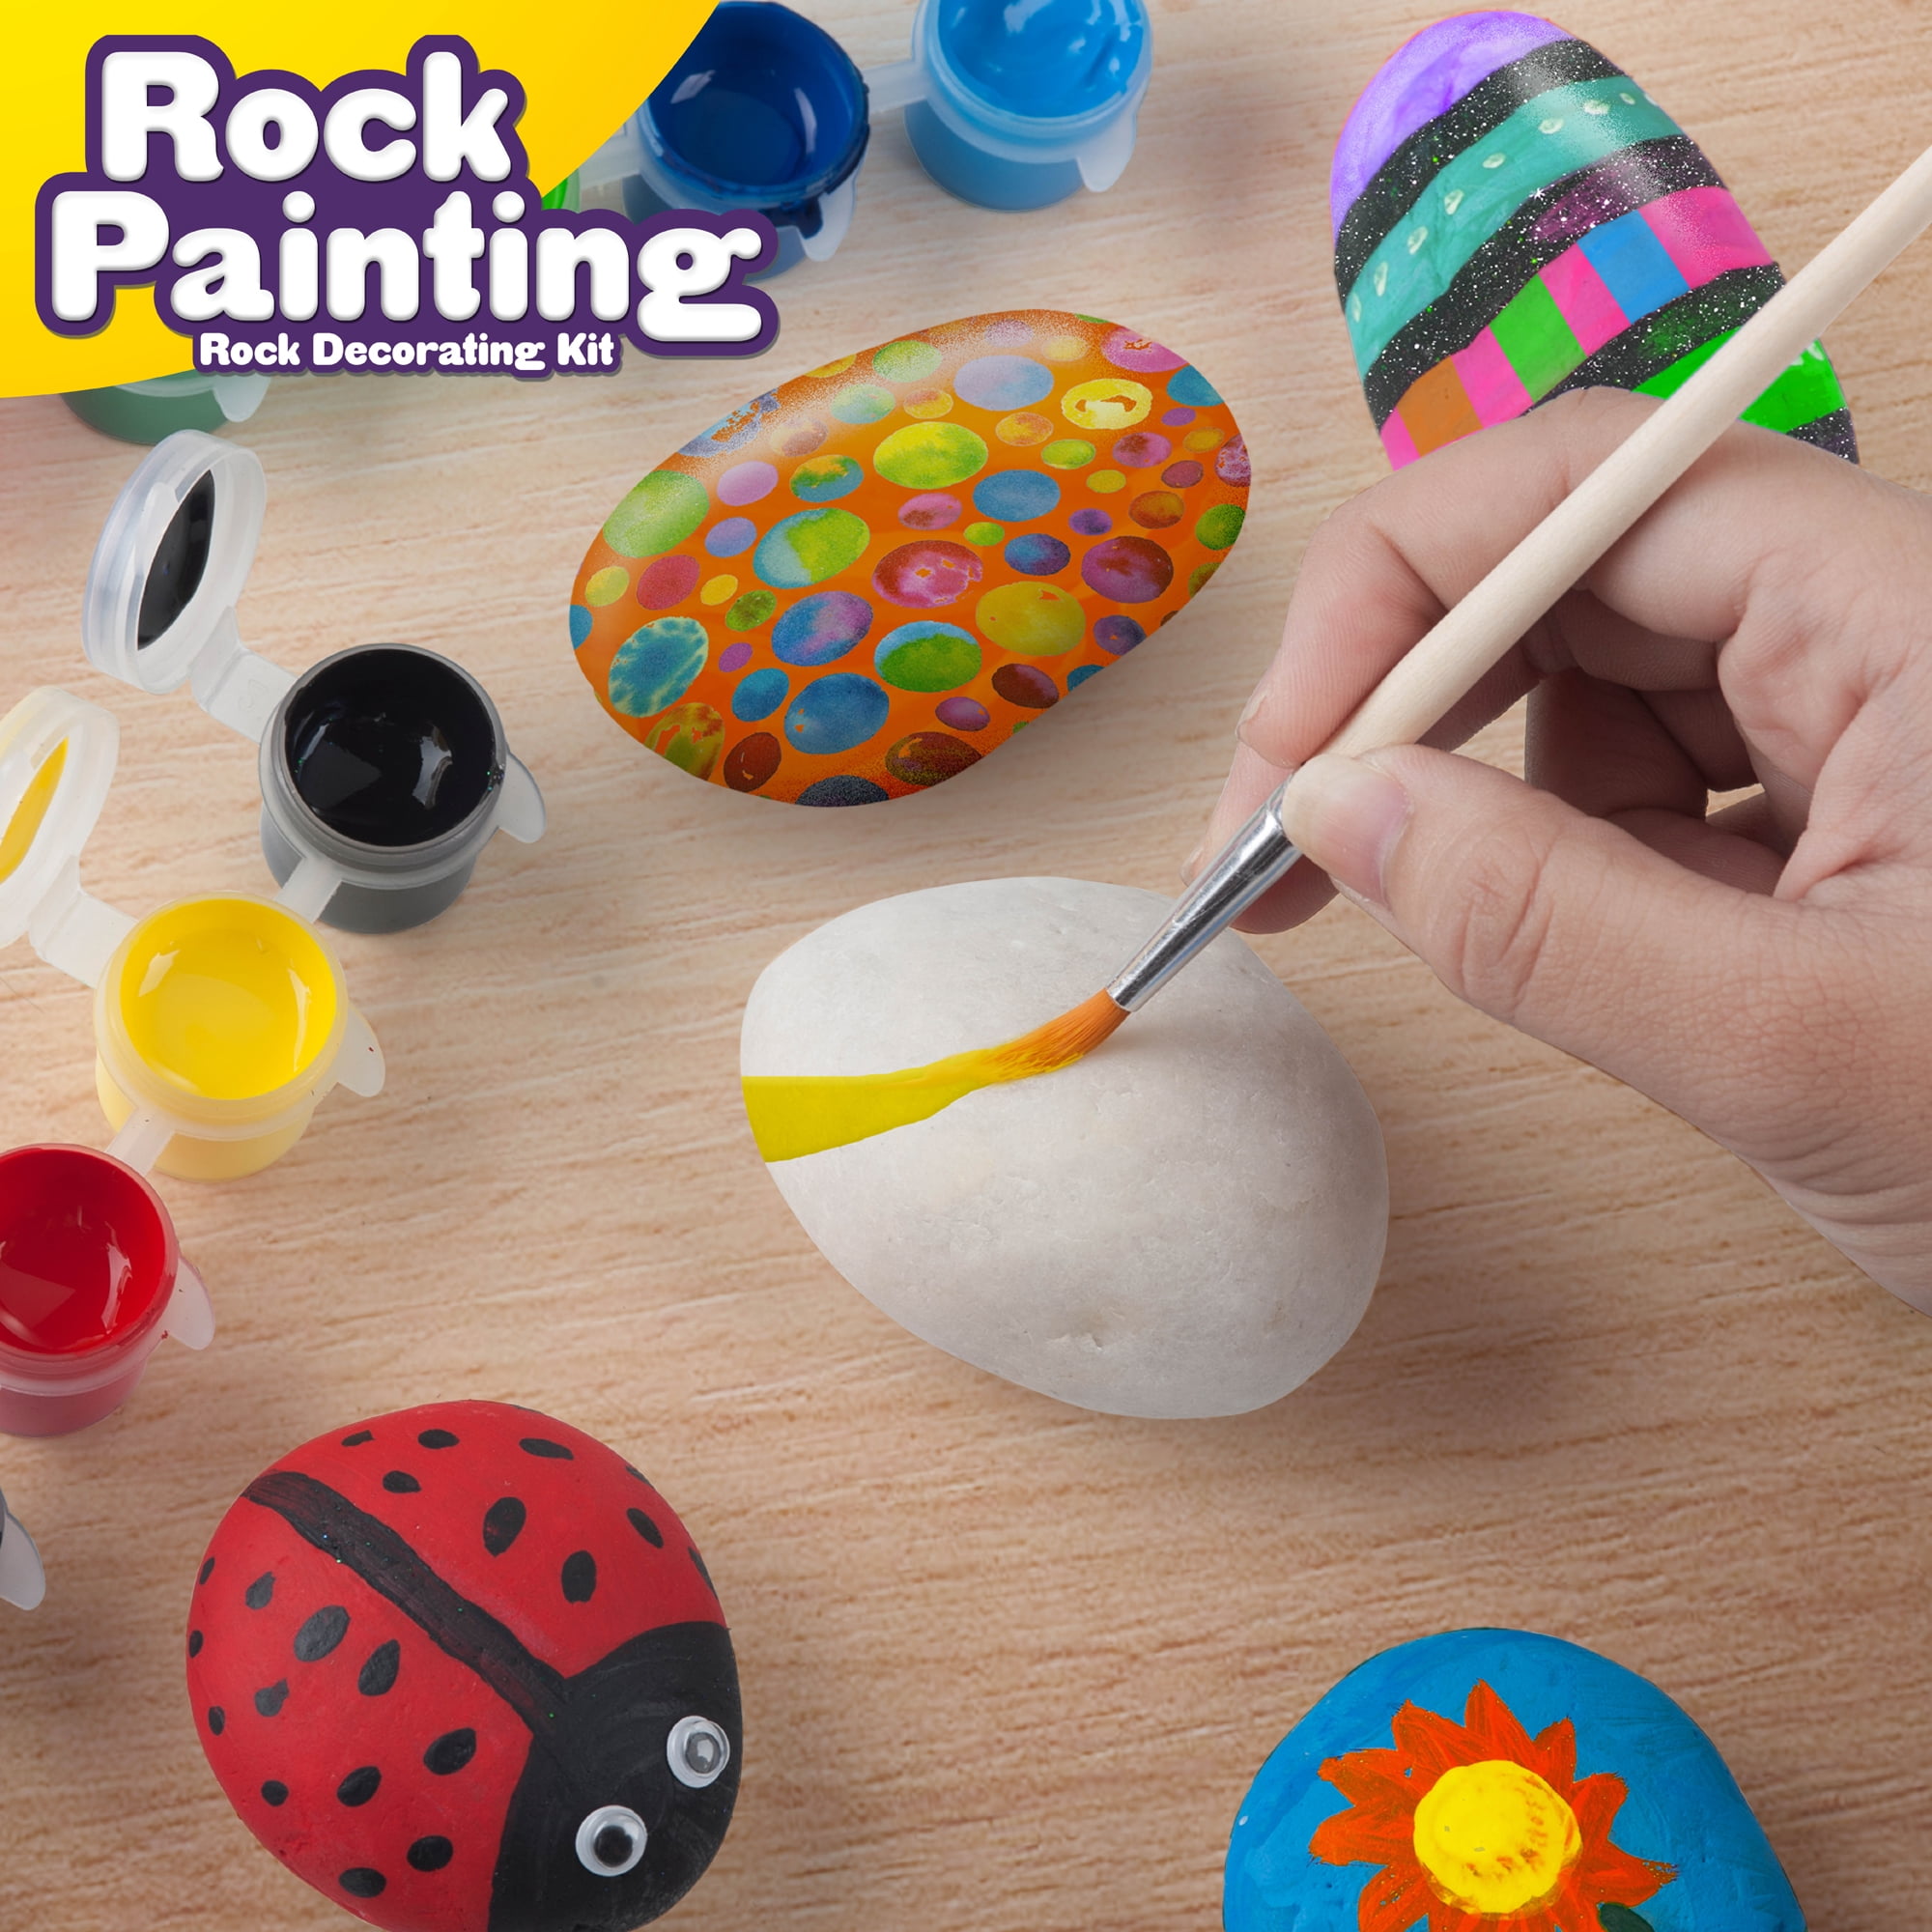 DOODLE HOG Kindness Rock Painting Kit for Kids - Arts and Crafts for Girls  Boys Ages 6-12 - Art Craft Kits Paint Set - Supplies for Painting Rocks -  DIY Gift Ideas